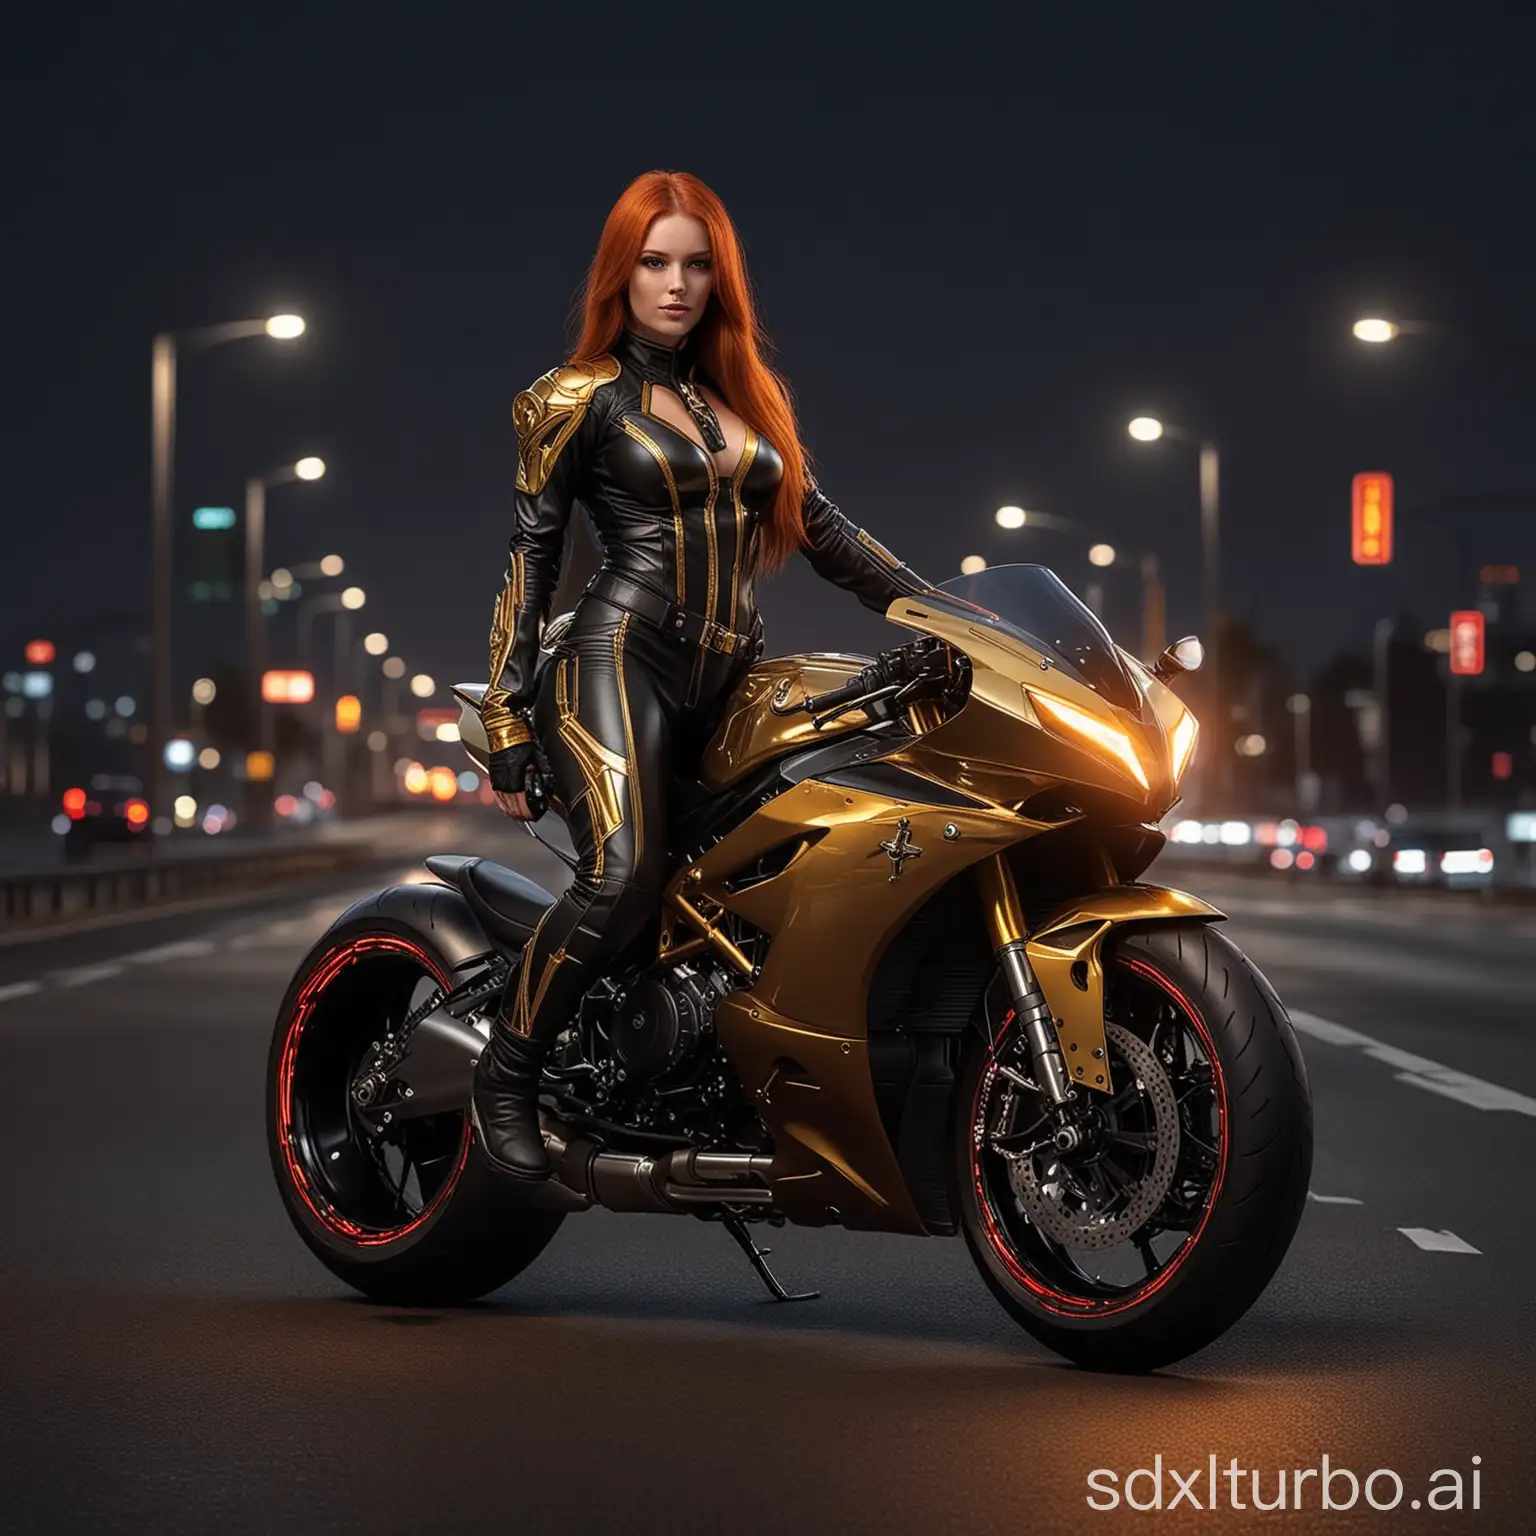 realistic full body image of a beautiful woman with long red straight hair wearing a black gold cross chin,with a luminous rider suits outfit, riding a beautiful neon luminous glowing big motorcyle in a dark highways